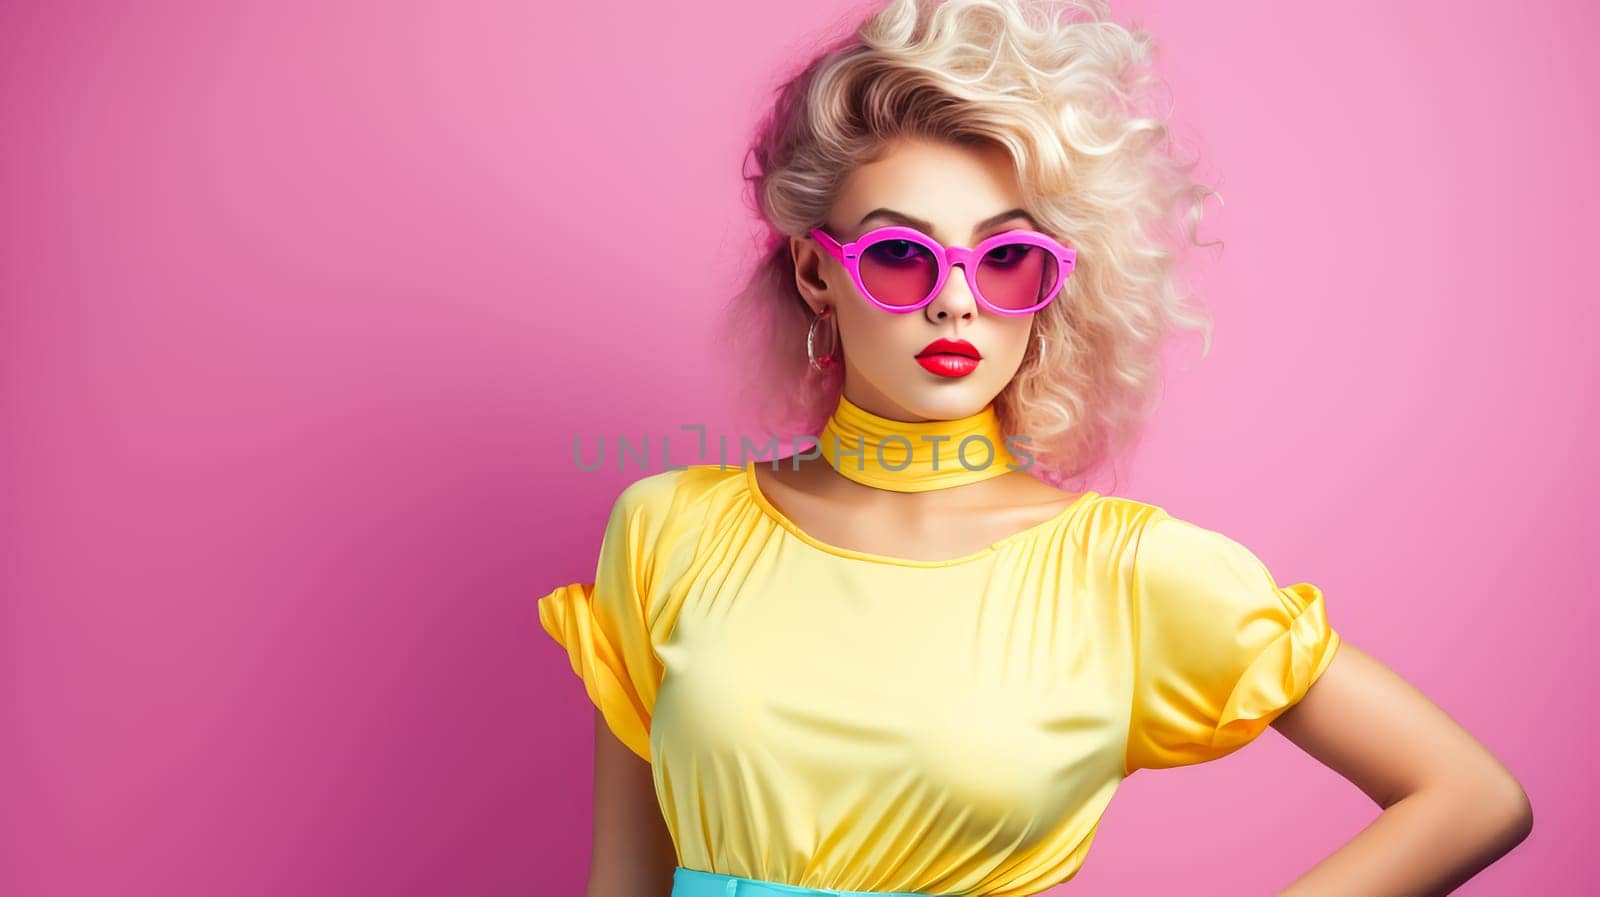 Young blonde girl, woman with glasses in a fashionable bright outfit of the 80s, pink and blue, informal by Alla_Yurtayeva